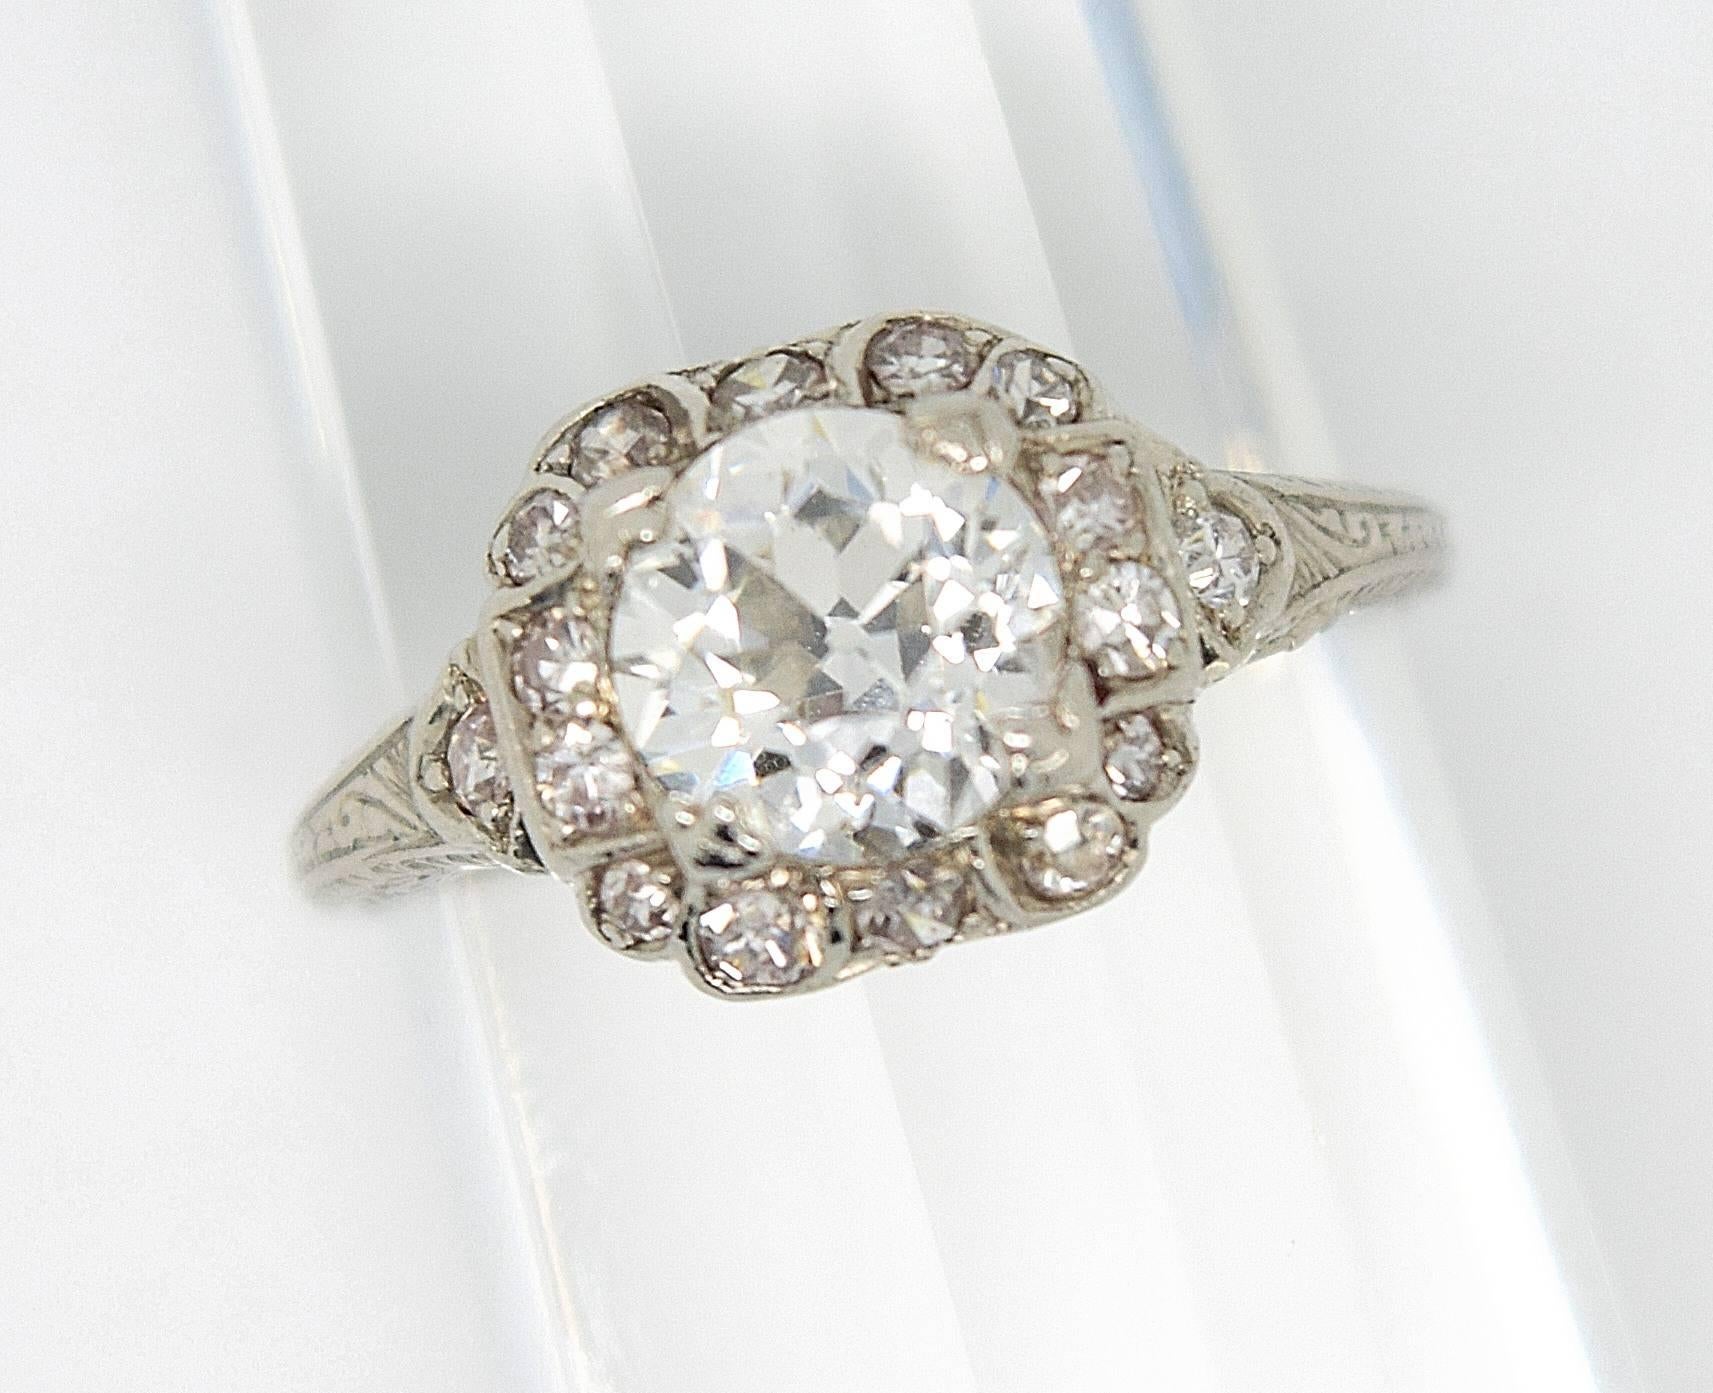 Stunning Art Deco Old European cut diamond and platinum engagement ring. The center old European cut diamond is approximately 1.25ct G/H color and VS1 clarity. The ring is enhanced by 16 side old cut diamonds. The handmade ring is designed in a